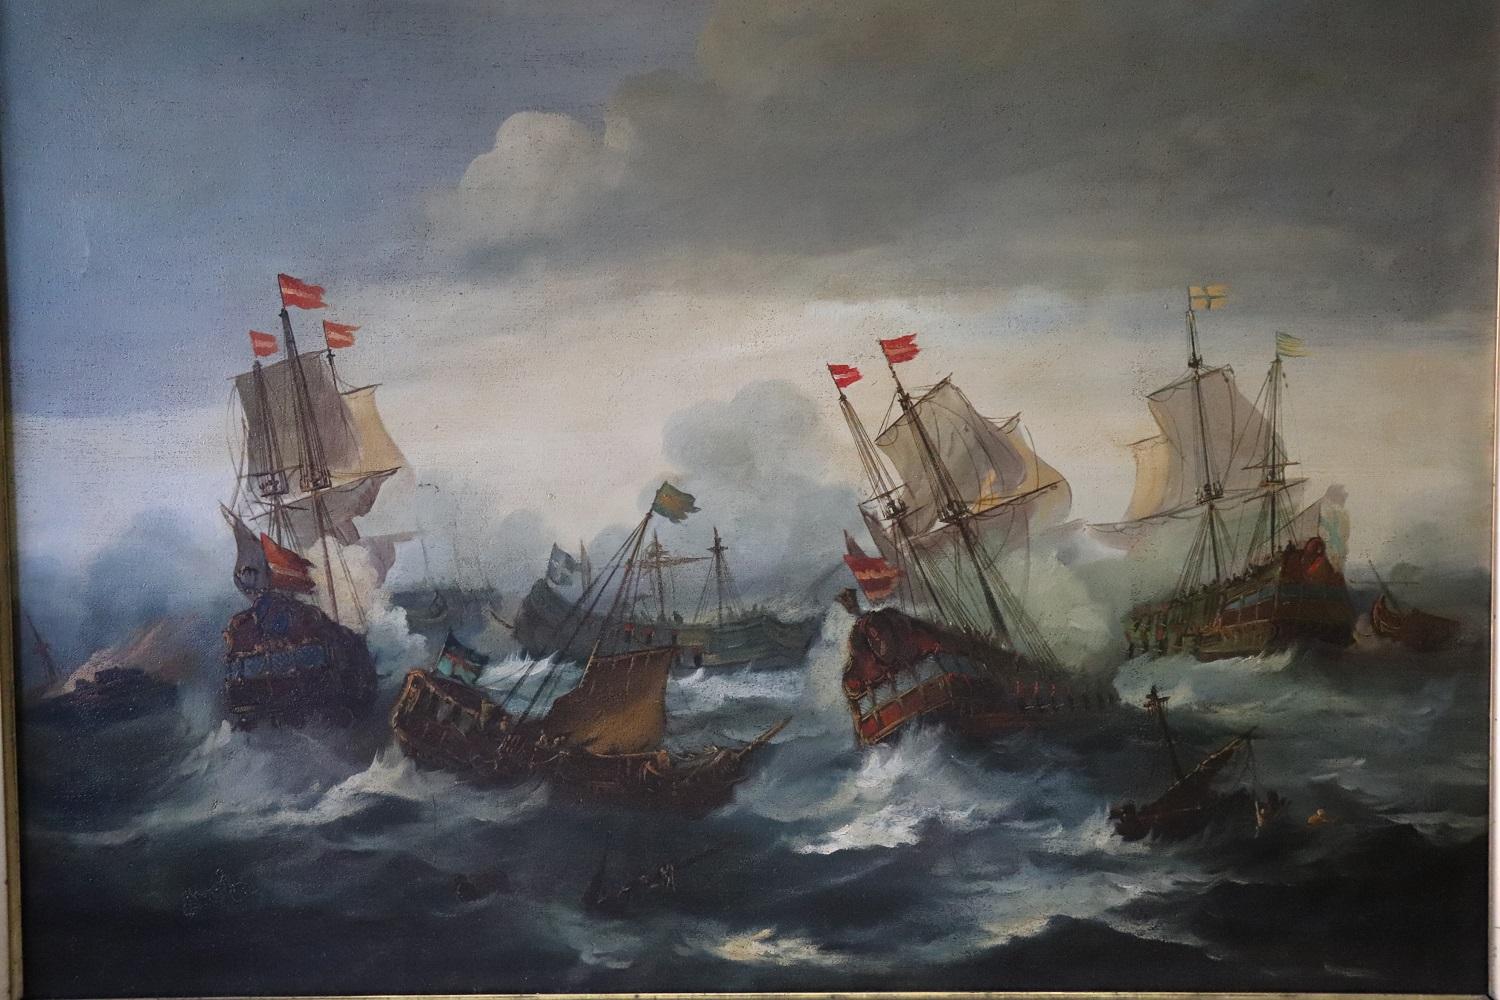 Beautiful antique marine oil painting on canvas, early 19th century. Excellent pictorial quality. Large antique Italian painting beautiful marine scene where some galleons fight in battle in the stormy sea. Excellent color rendering with great use